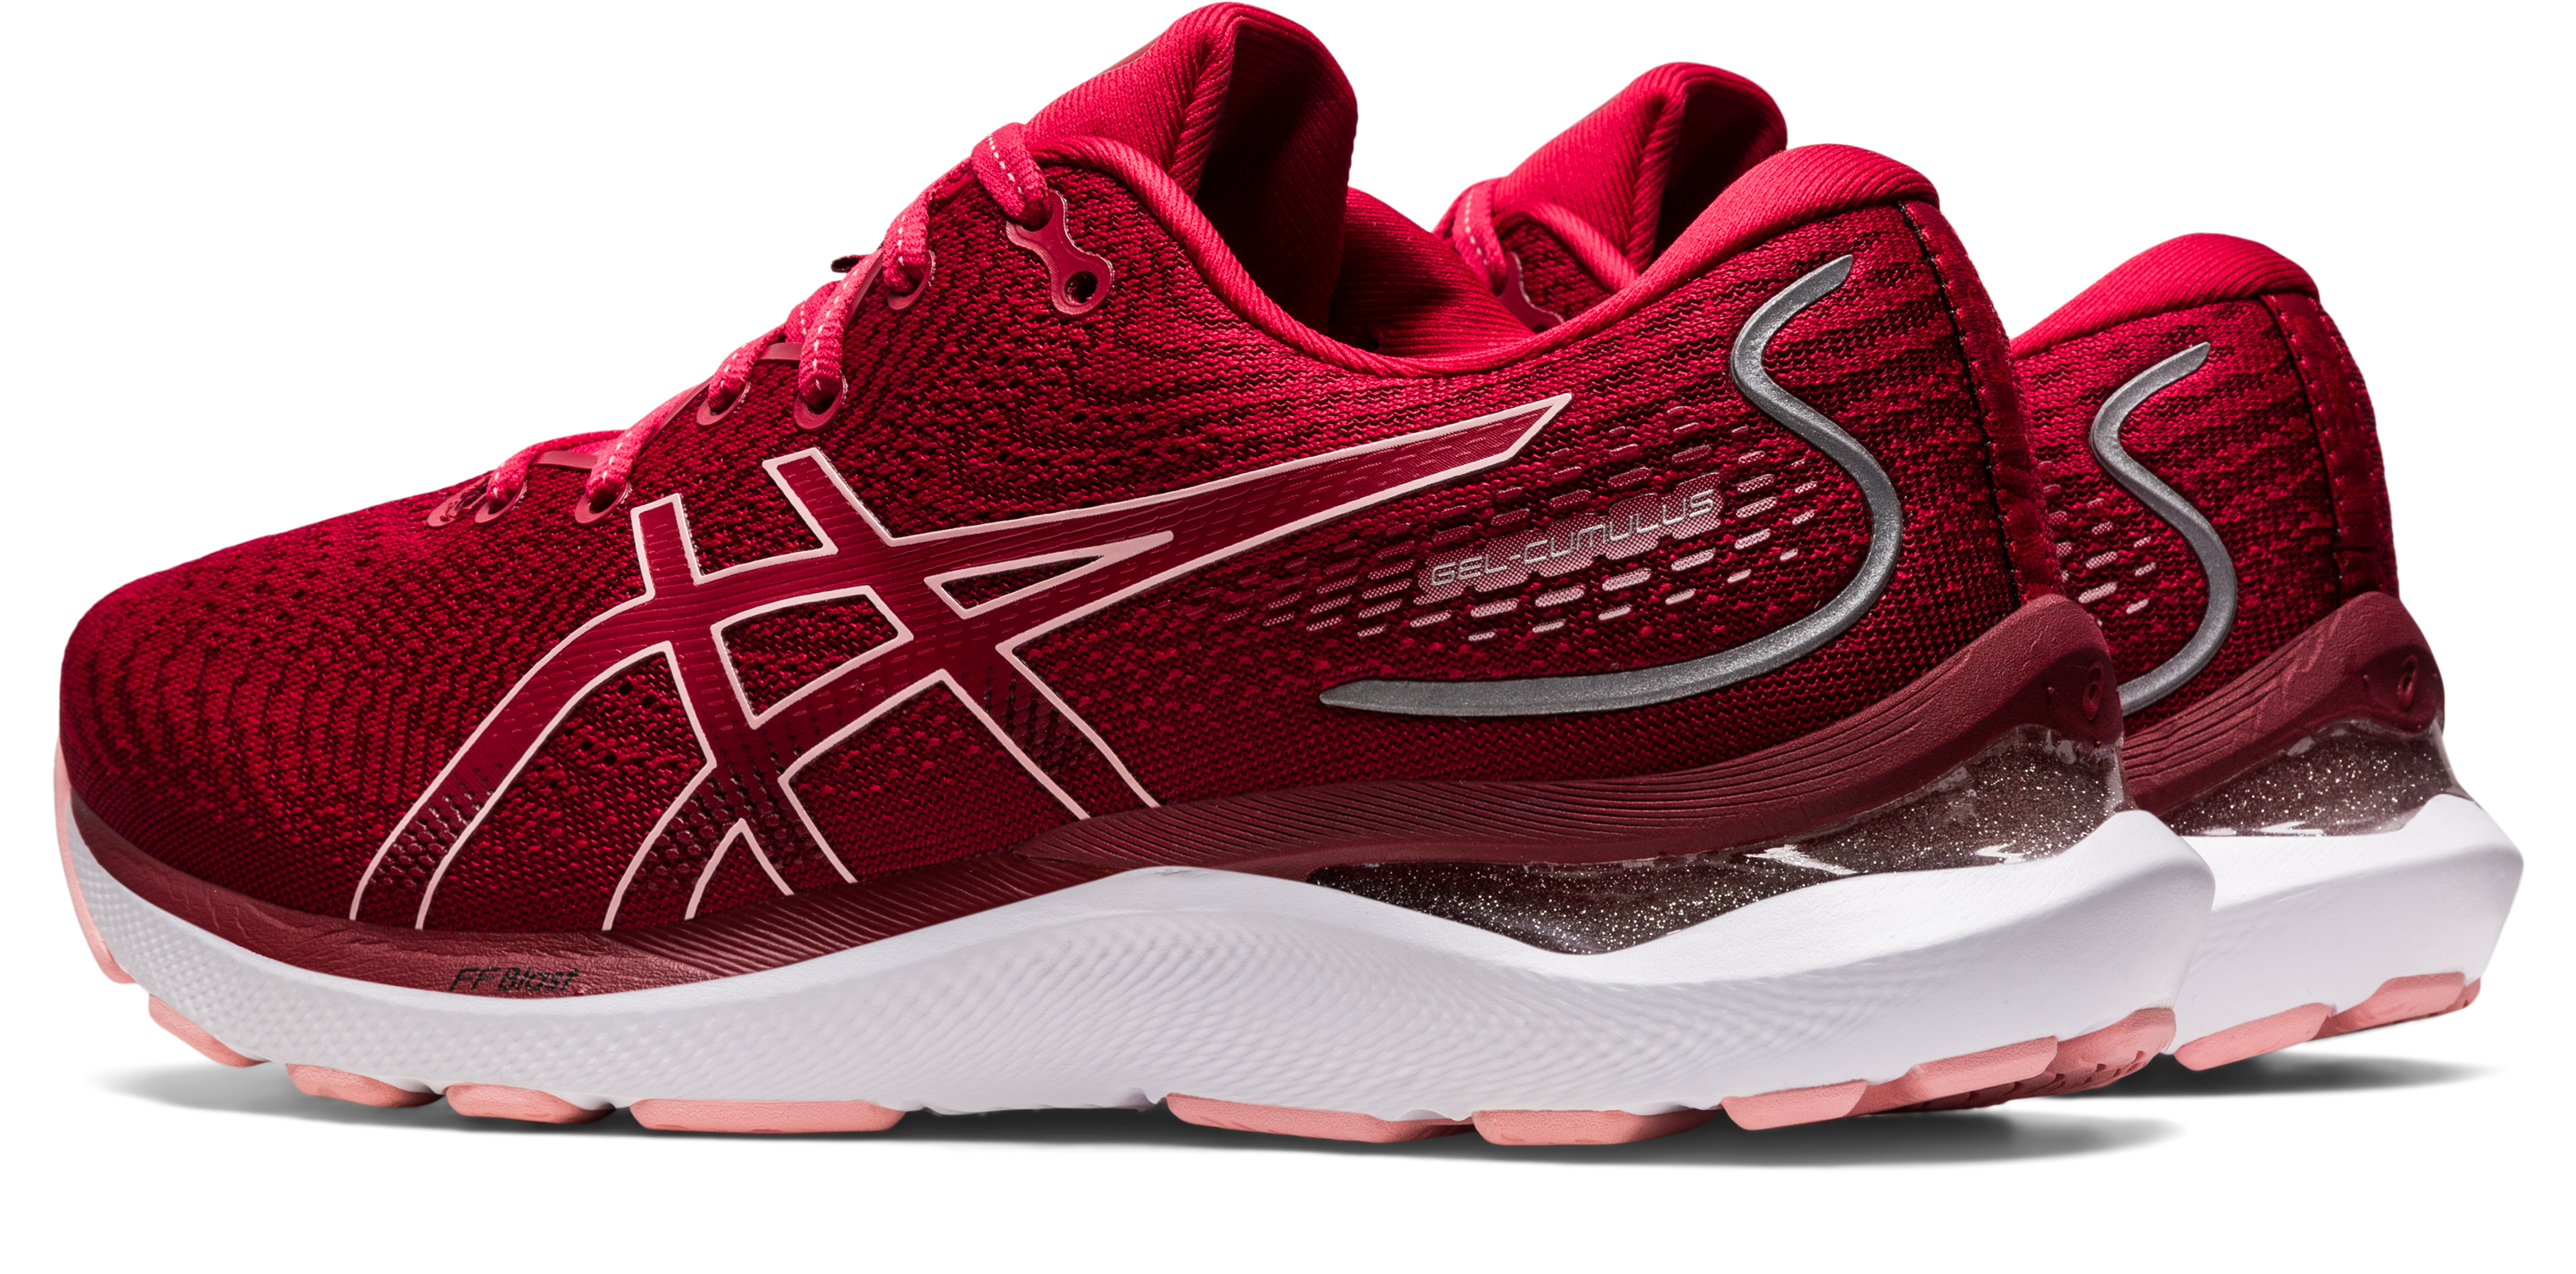 Asics Women's Gel-Cumulus 24 Running Shoes in Cranberry/Frosted Rose